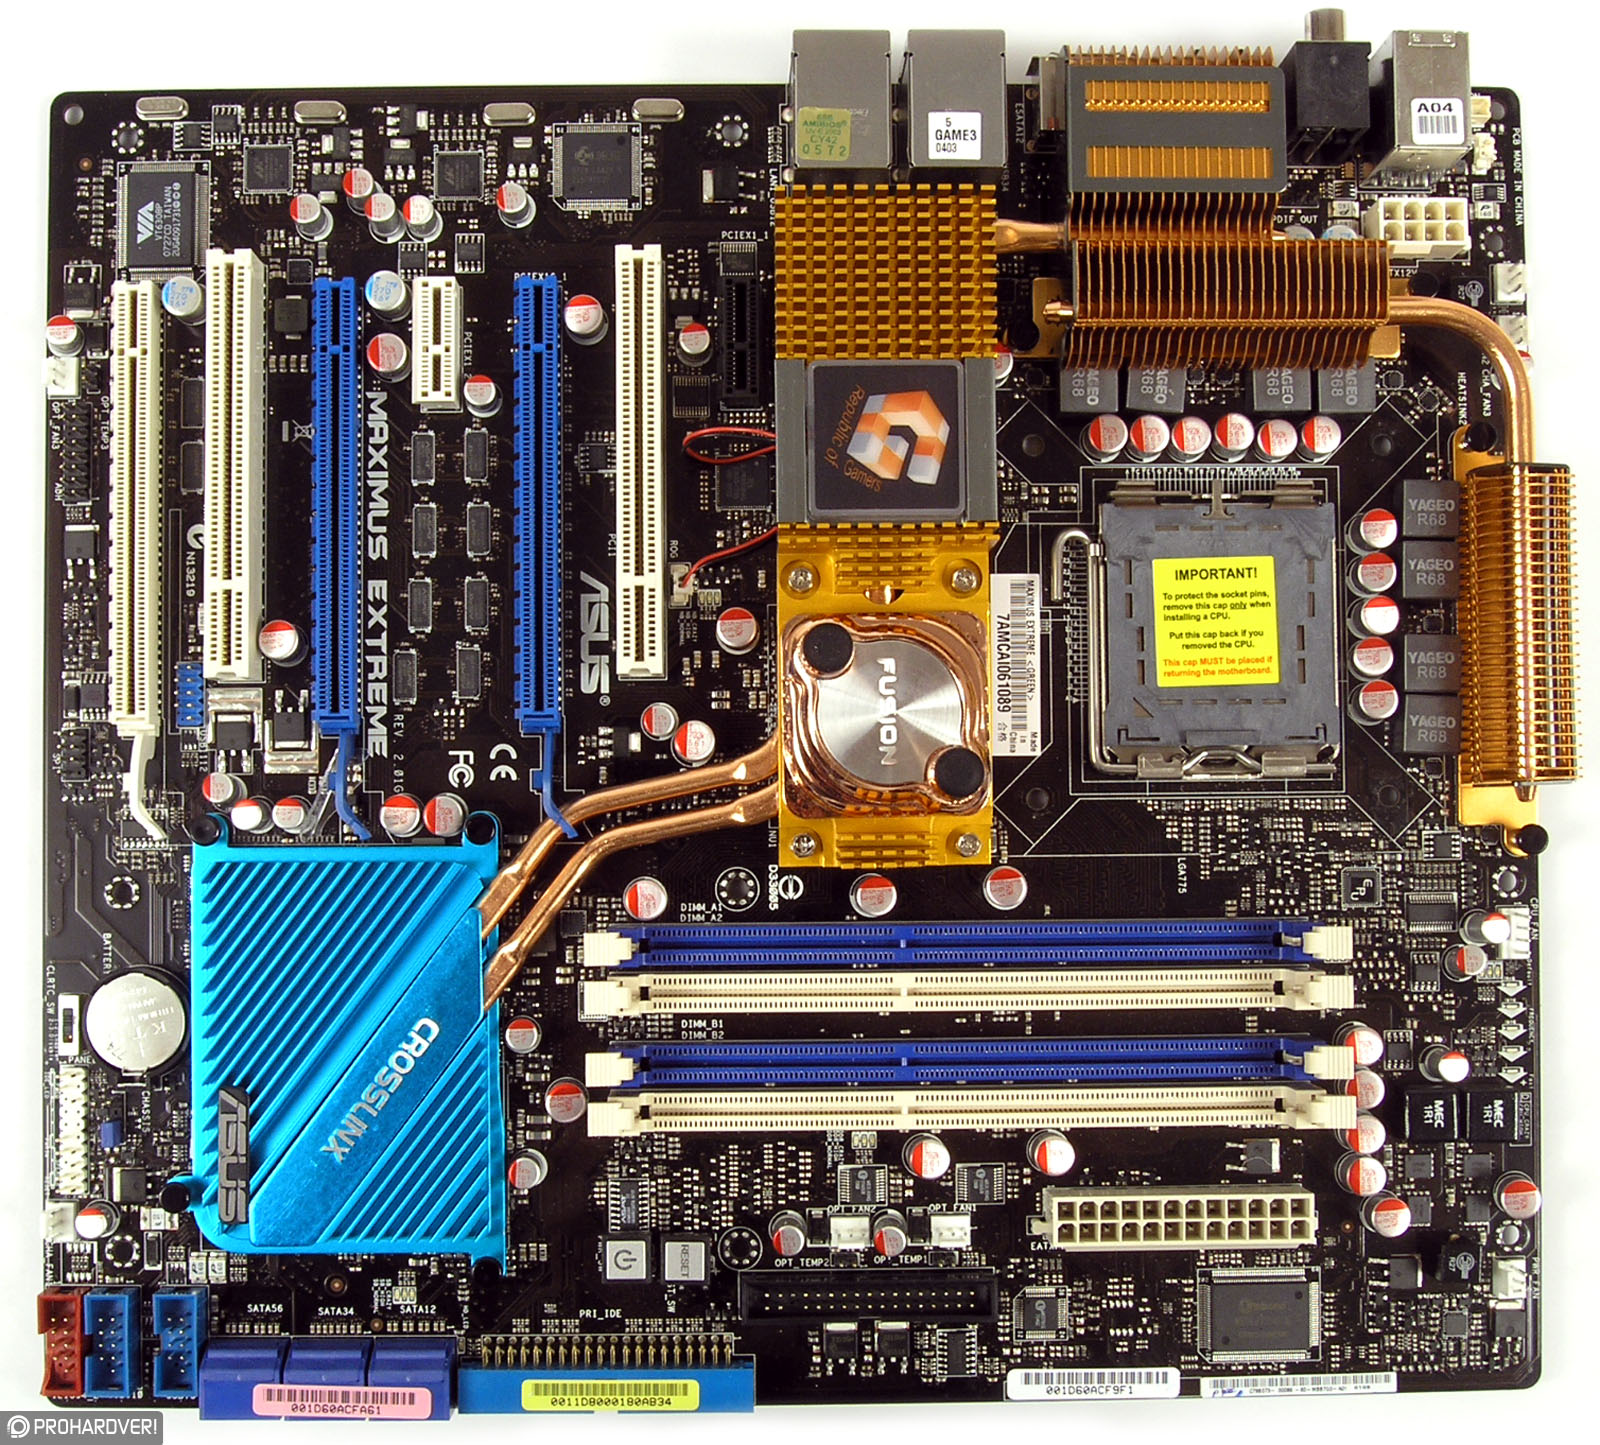 775 сокет ddr3. ASUS Maximus extreme 775. ASUS Maximus x38. ASUS 775 Socket ddr3. Мат.плата - Shuttle FX x38 Socket 775.